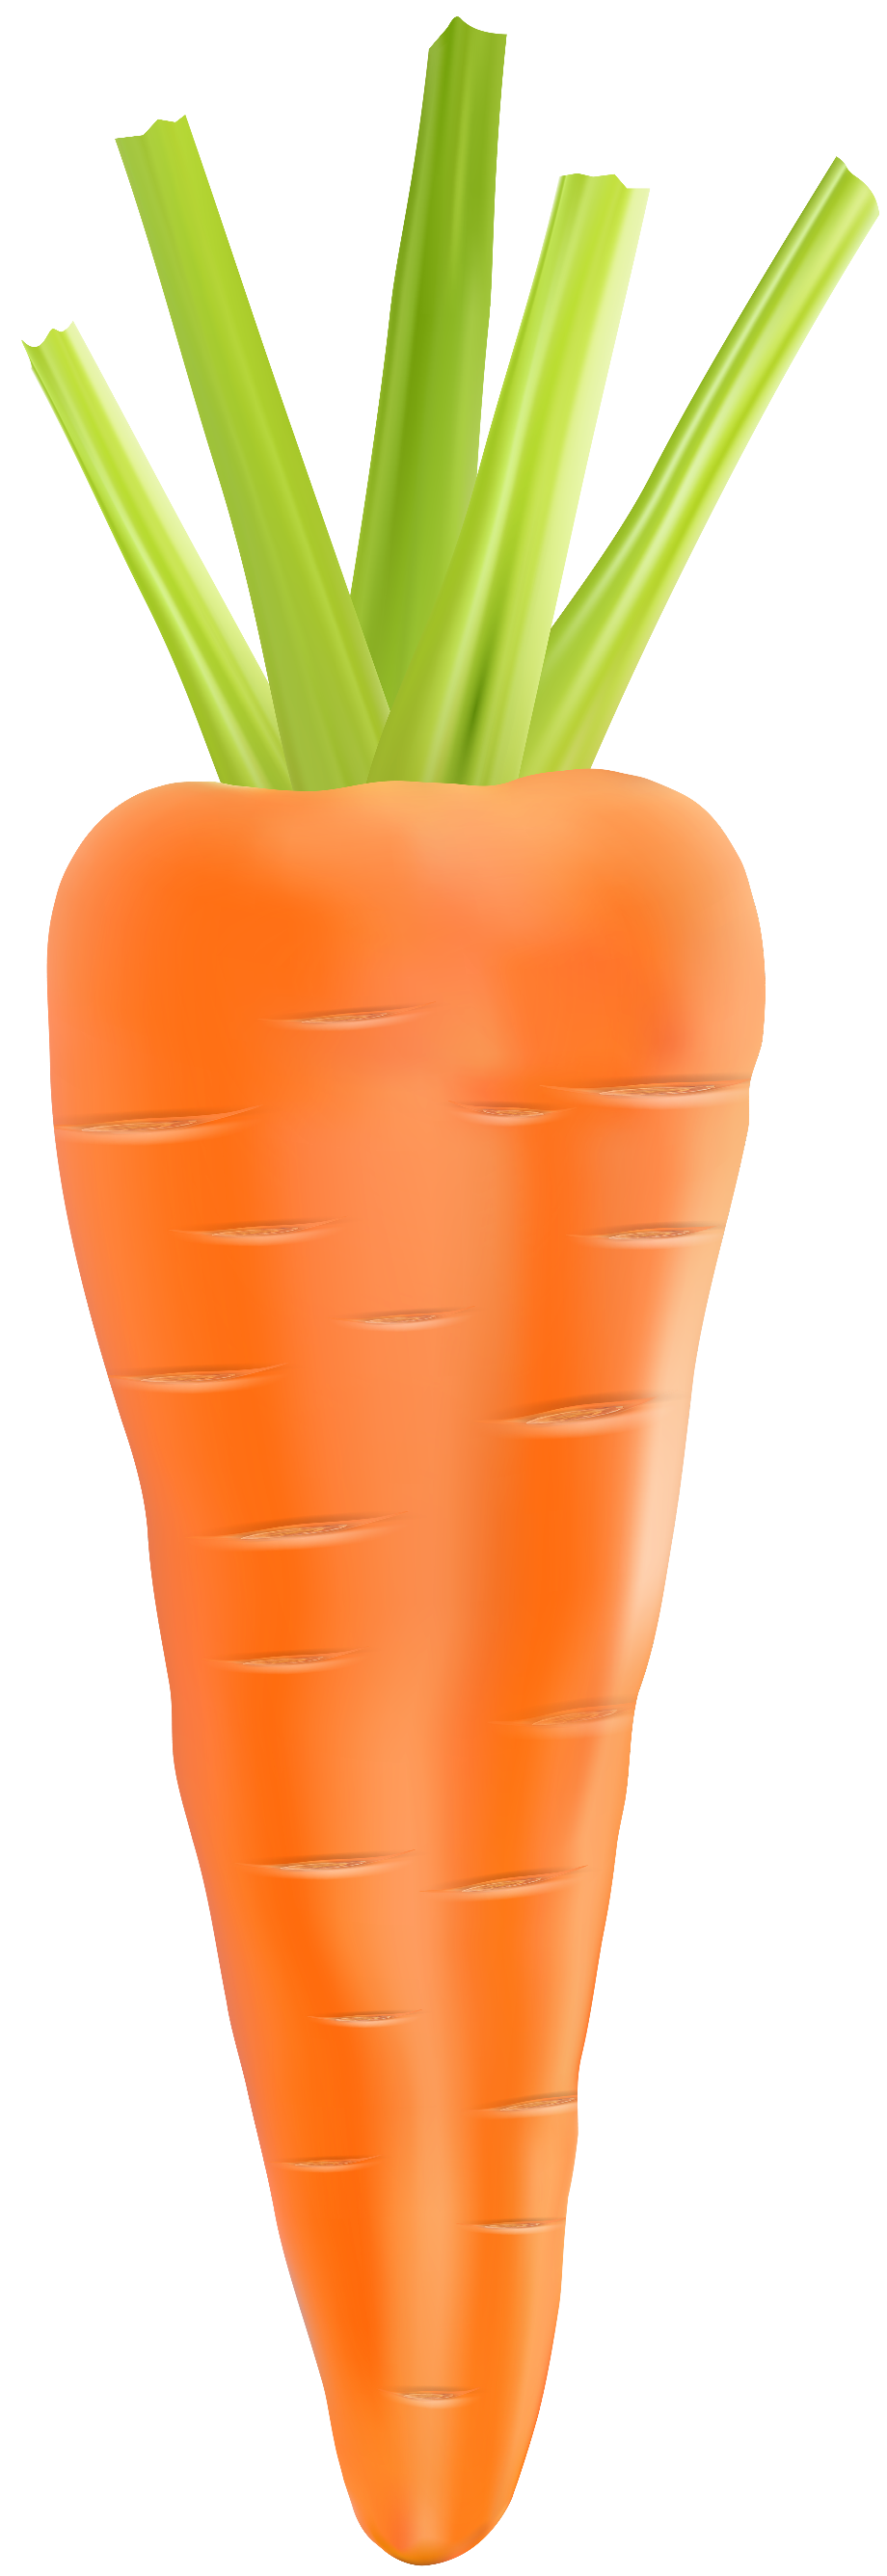 carrot clipart realistic